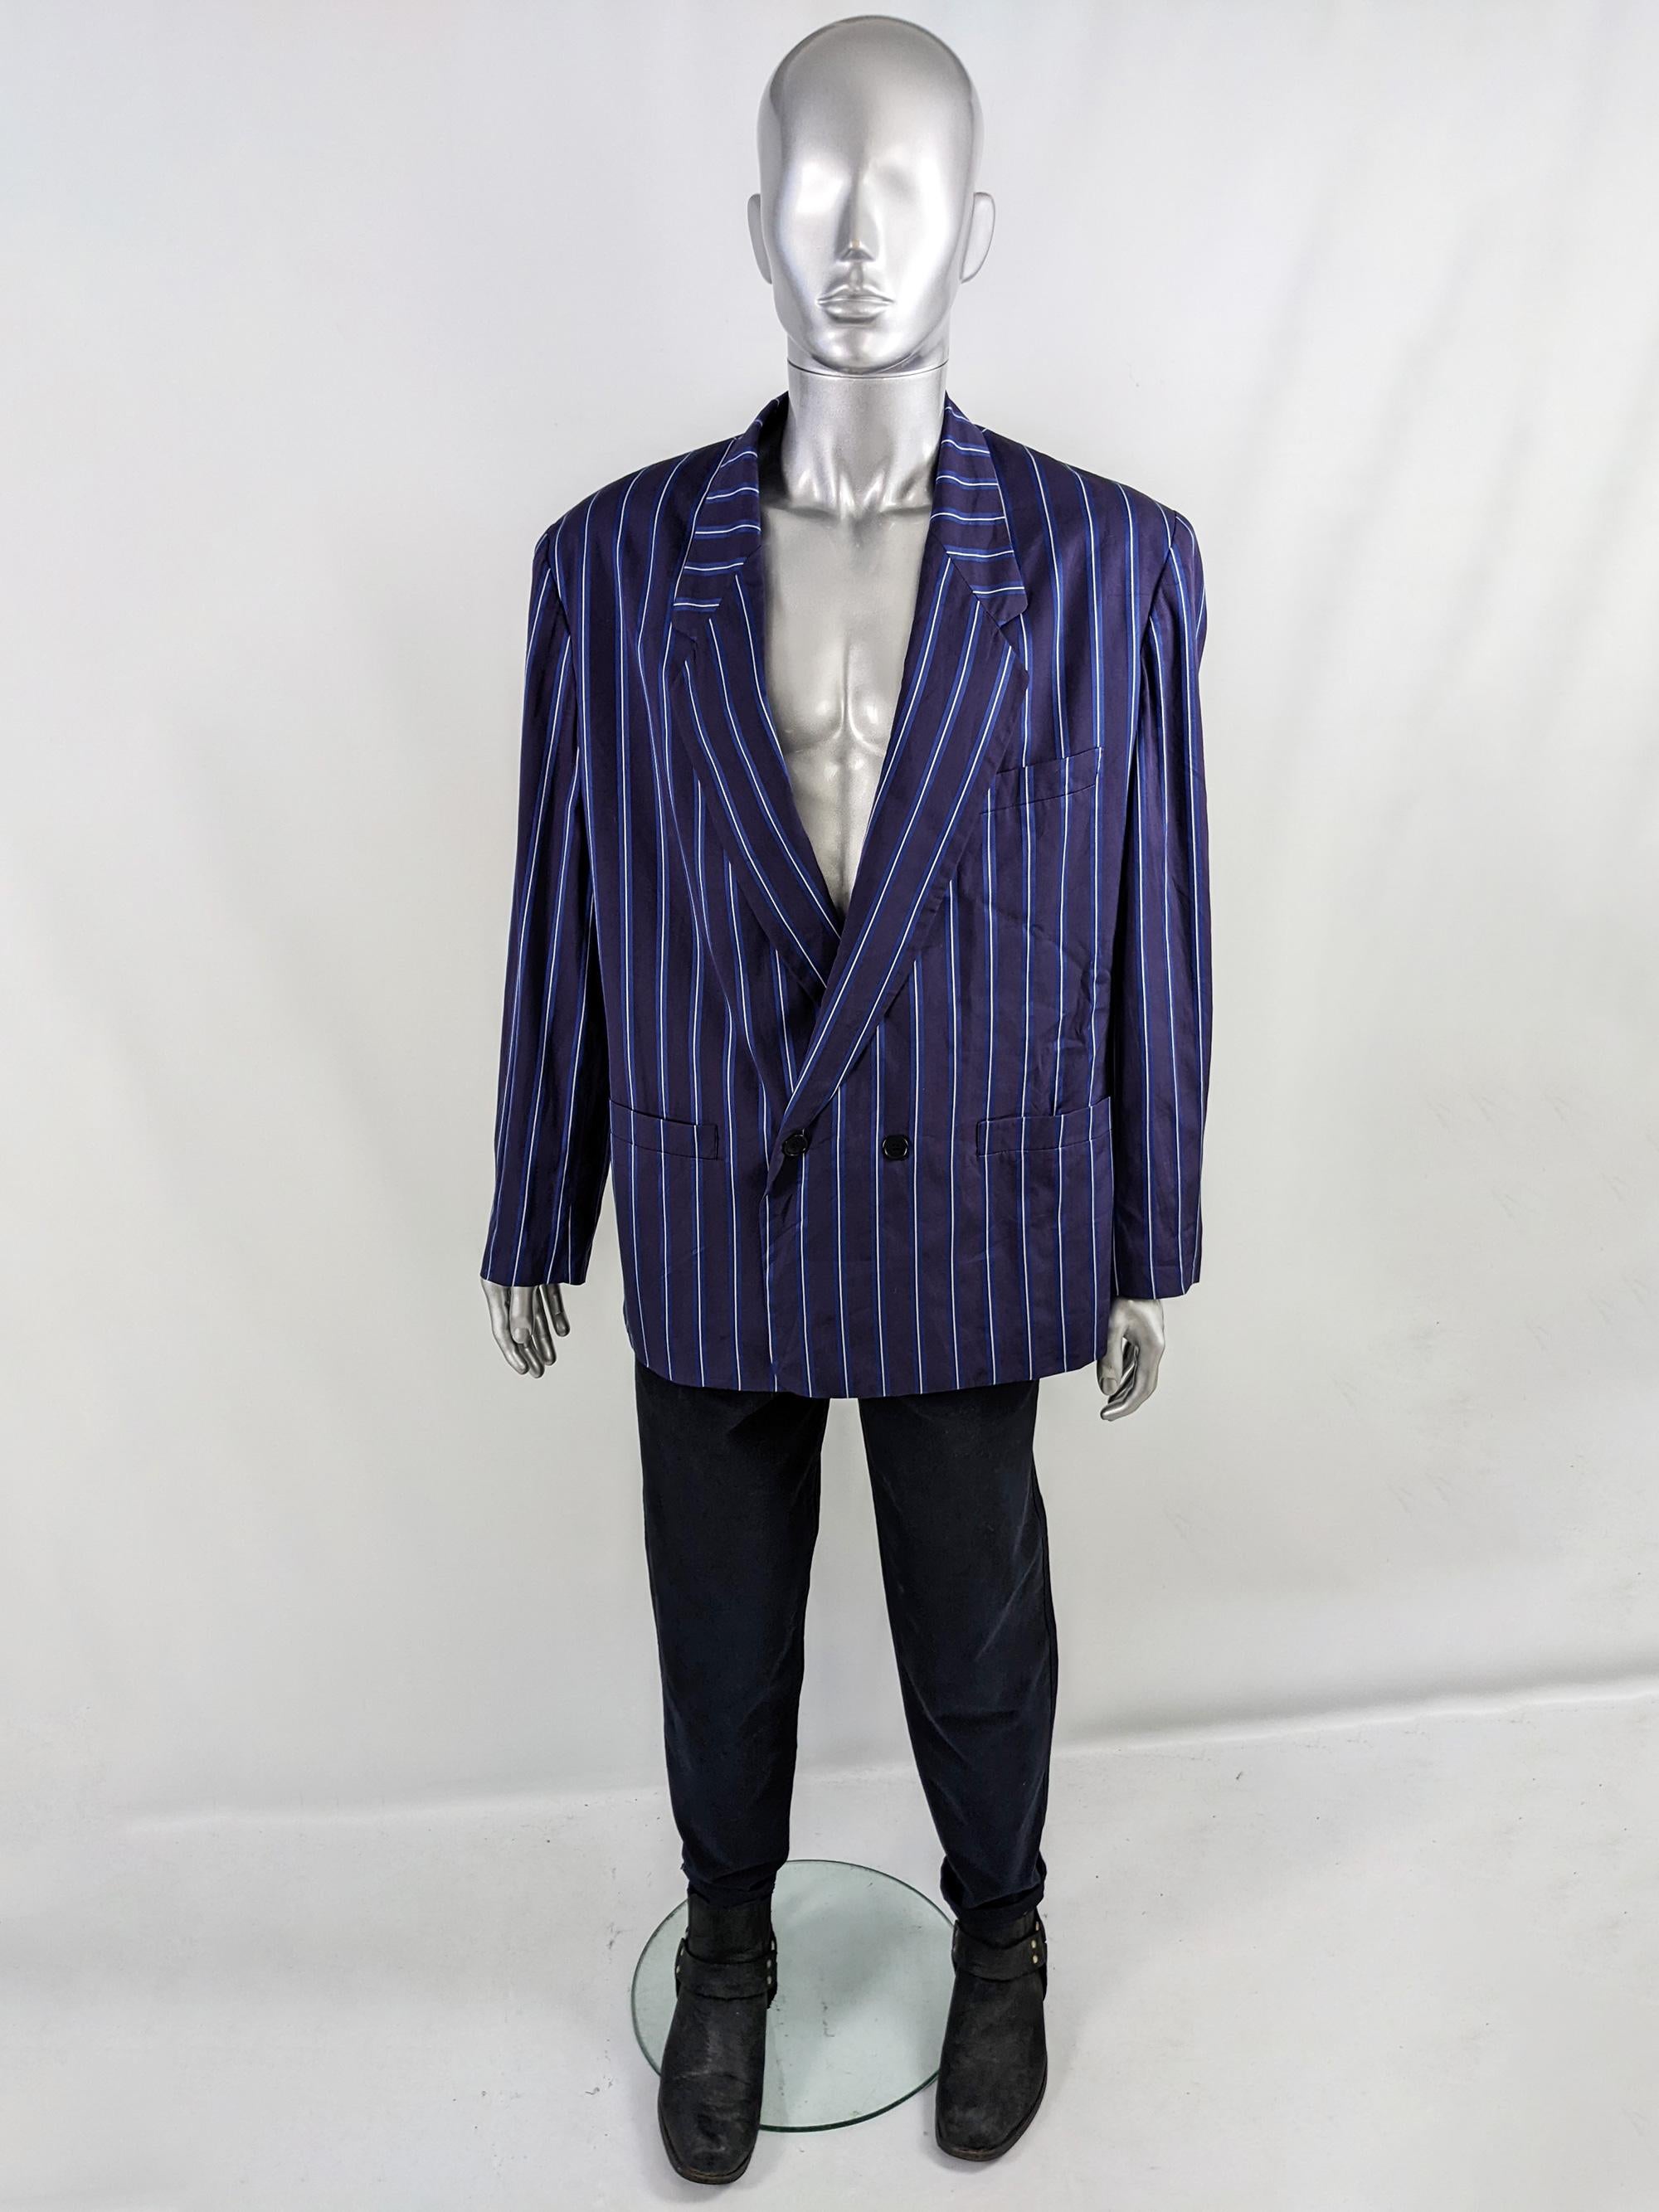 An excellent vintage mens boating style blazer from the 80s by luxury Italian fashion house, Byblos (who Gianni Versace was once a creative director of). In a dark purple fabric with a blue and white vertical regatta stripe throughout. It has